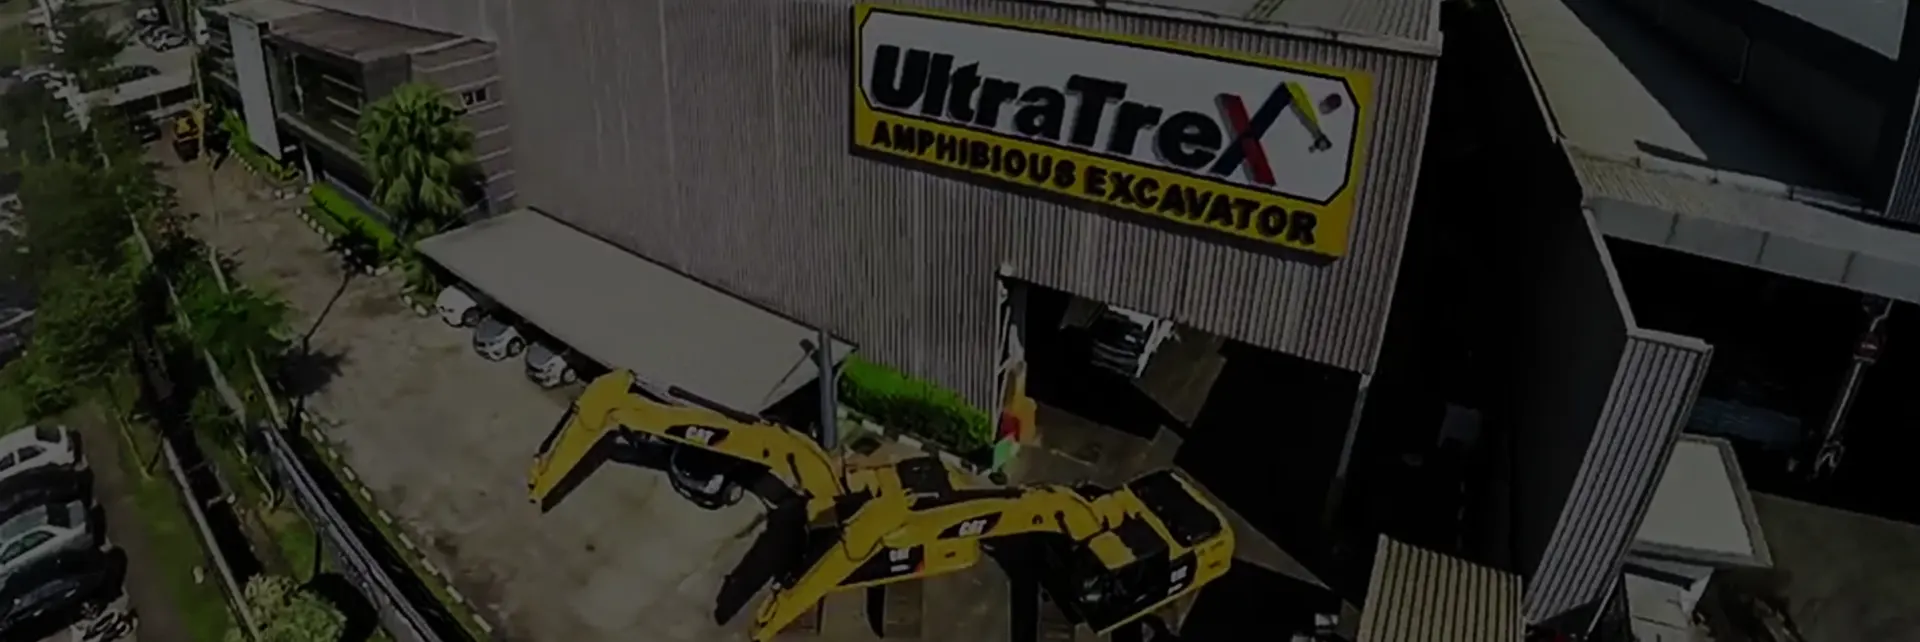 Contact Us - Ultratrex Machinery